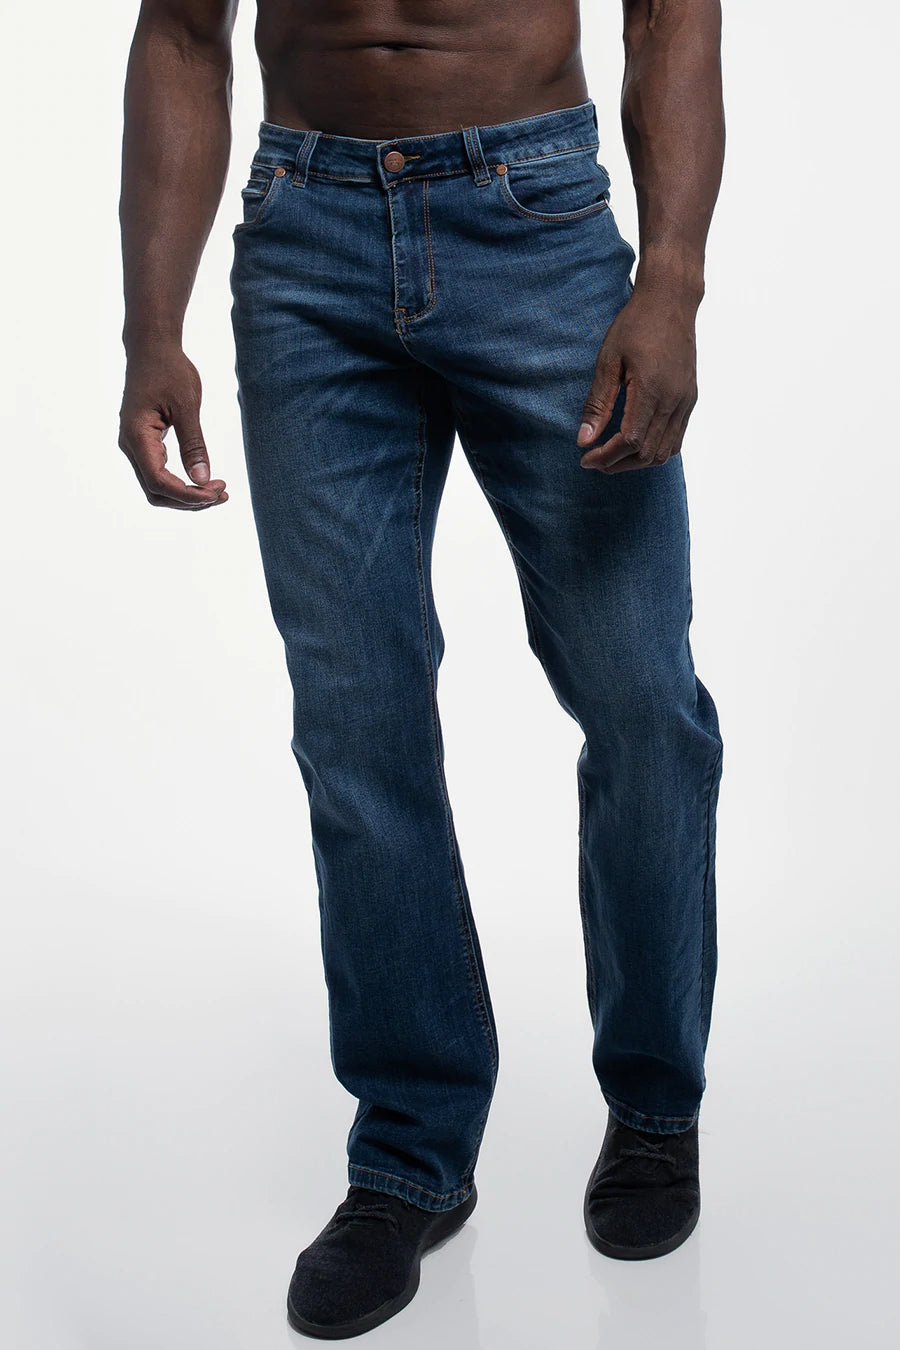 Straight Athletic Fit in Medium Wash ( Tall )